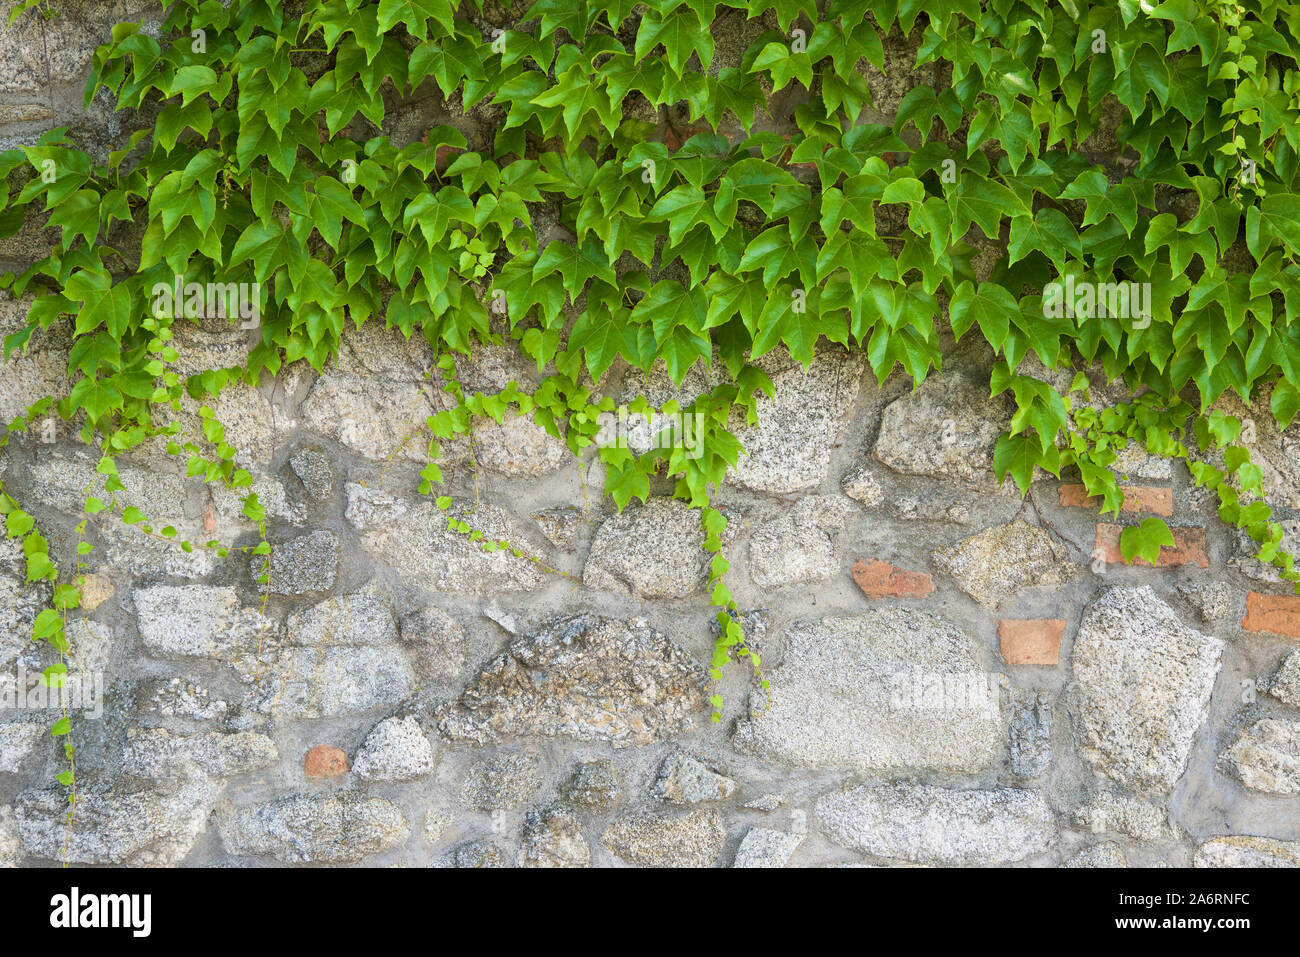 Ivy on a stone wall Stock Photo